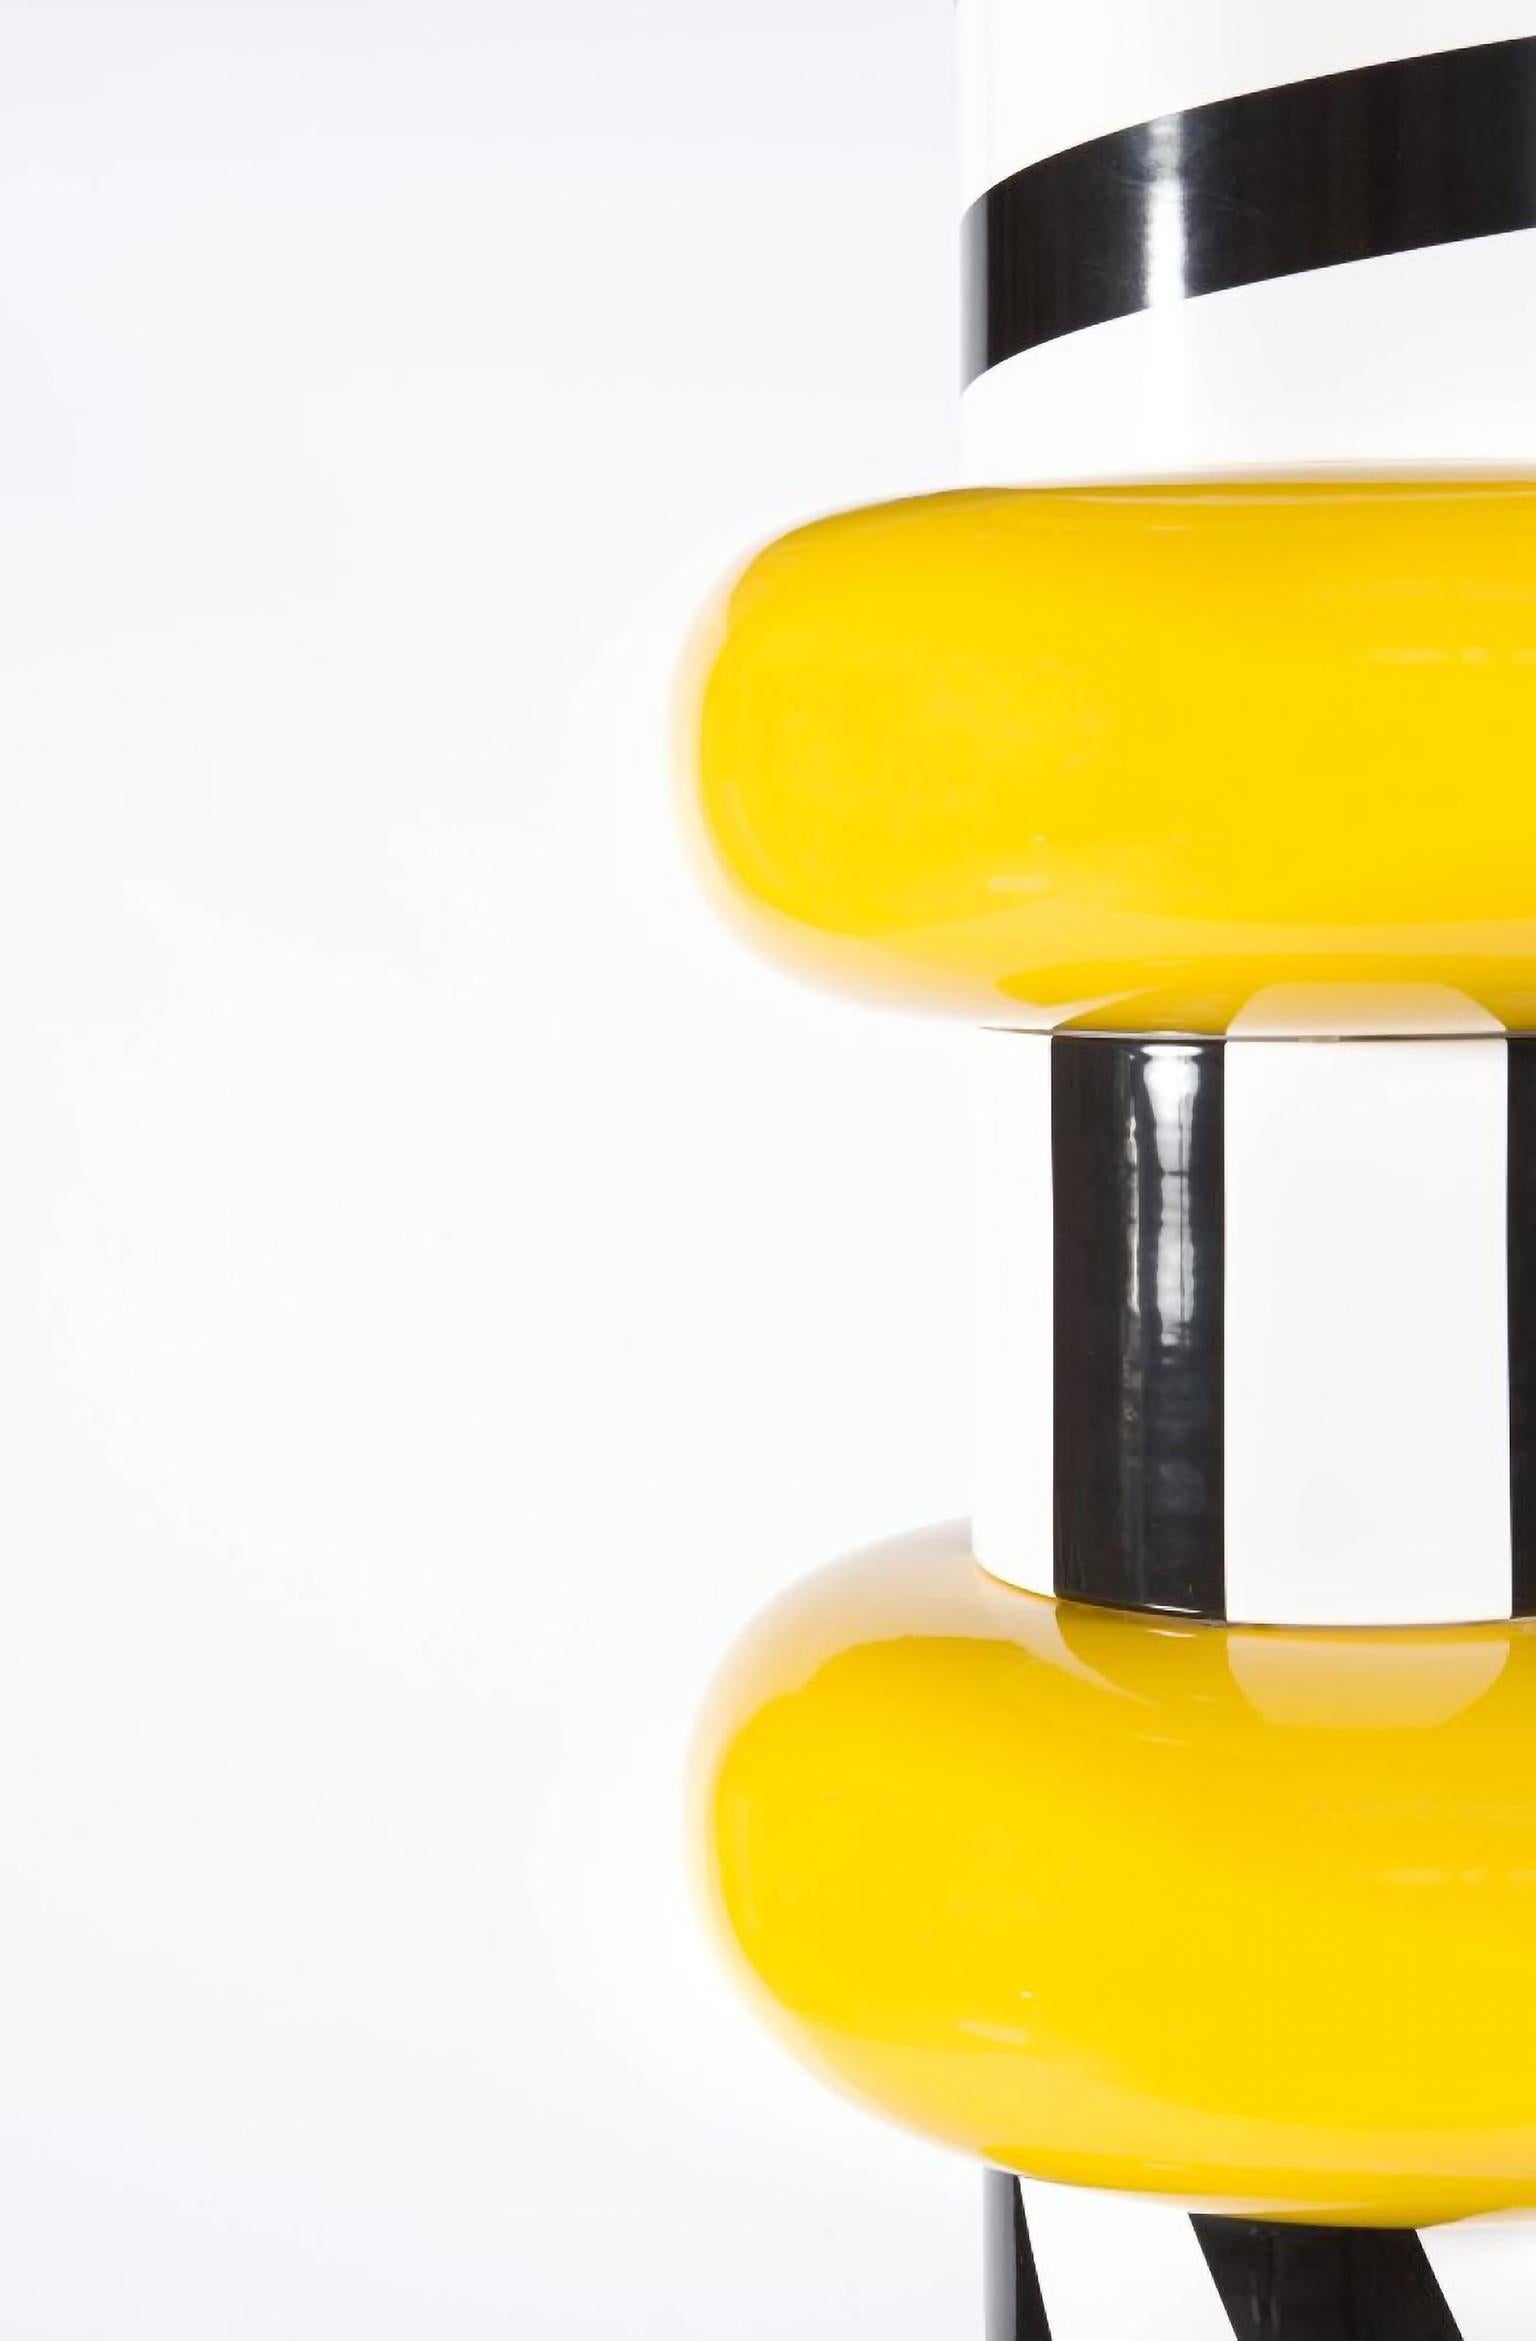 Post-Modern Contemporary Art TOTEM Odalisca Yellow Black White PA by Ettore Sottsass For Sale